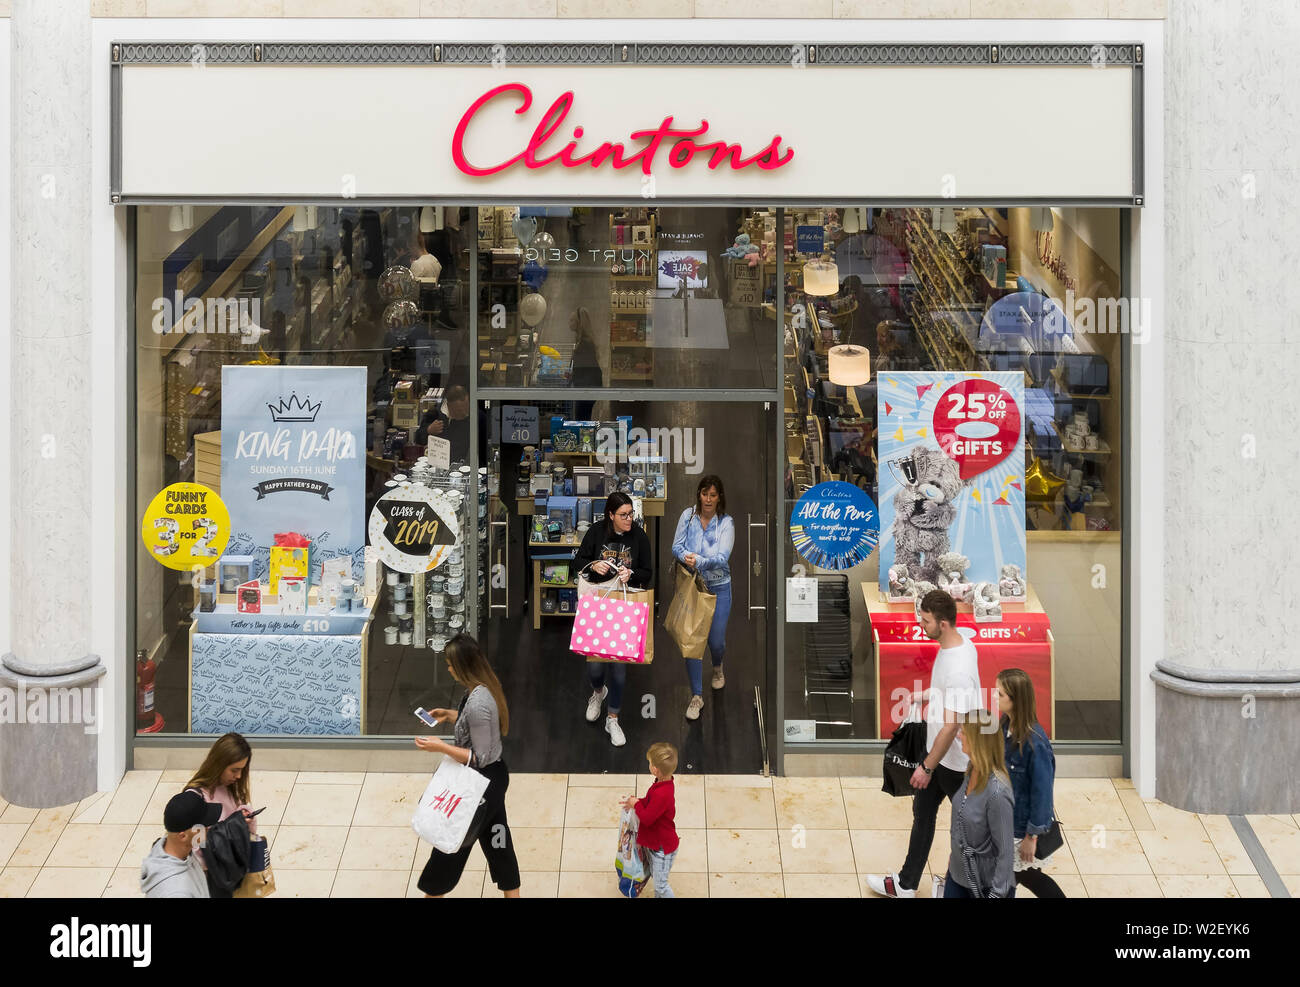 Clintons the card and gift retailer outlet at Metrocentre, Gateshead, UK Stock Photo